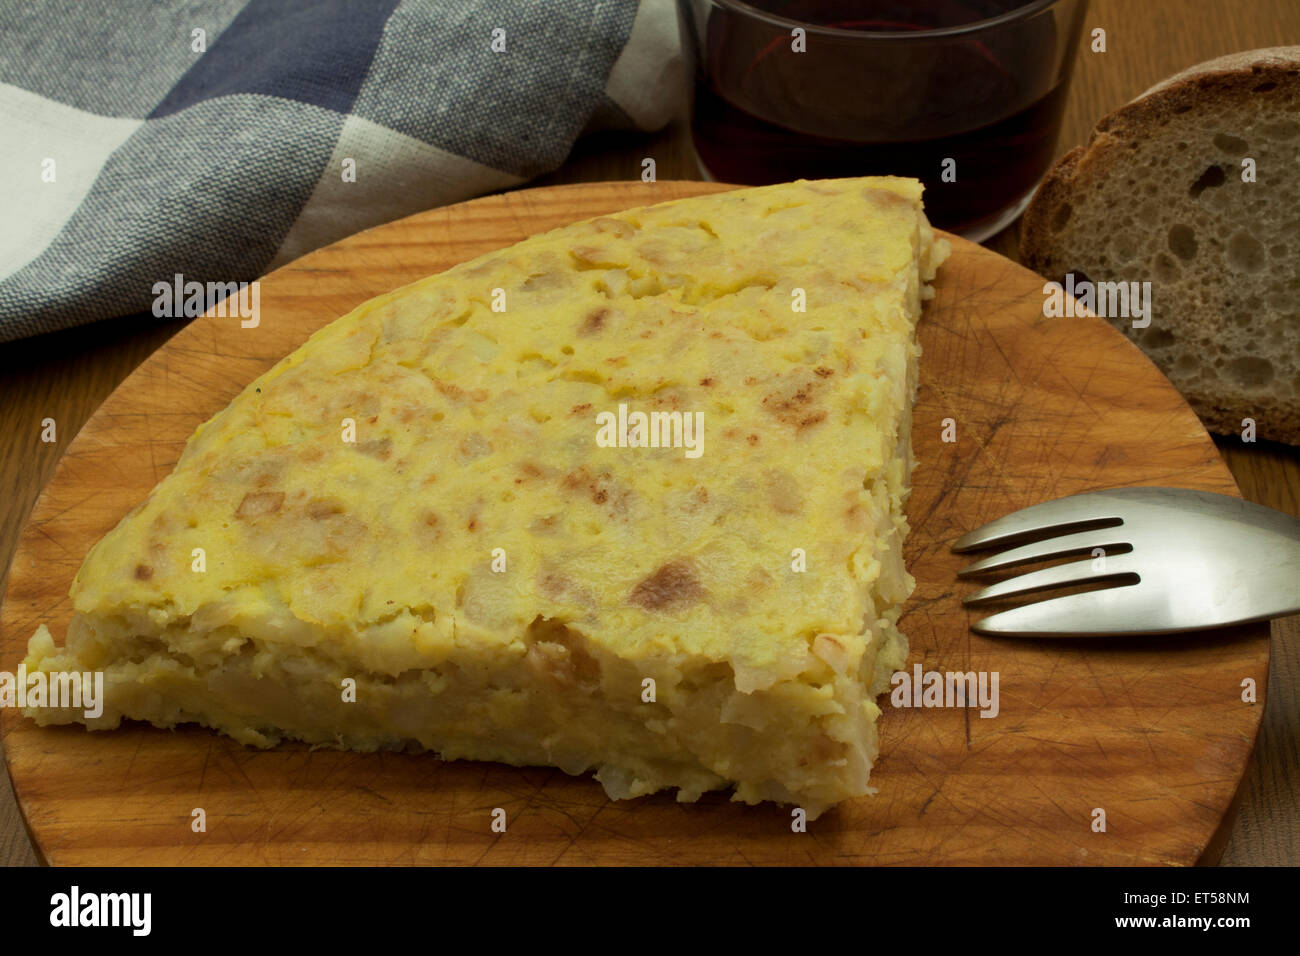 a piece of a spanish omelet over a wood board with a fork, a glass of wine and a piece of cloth Stock Photo